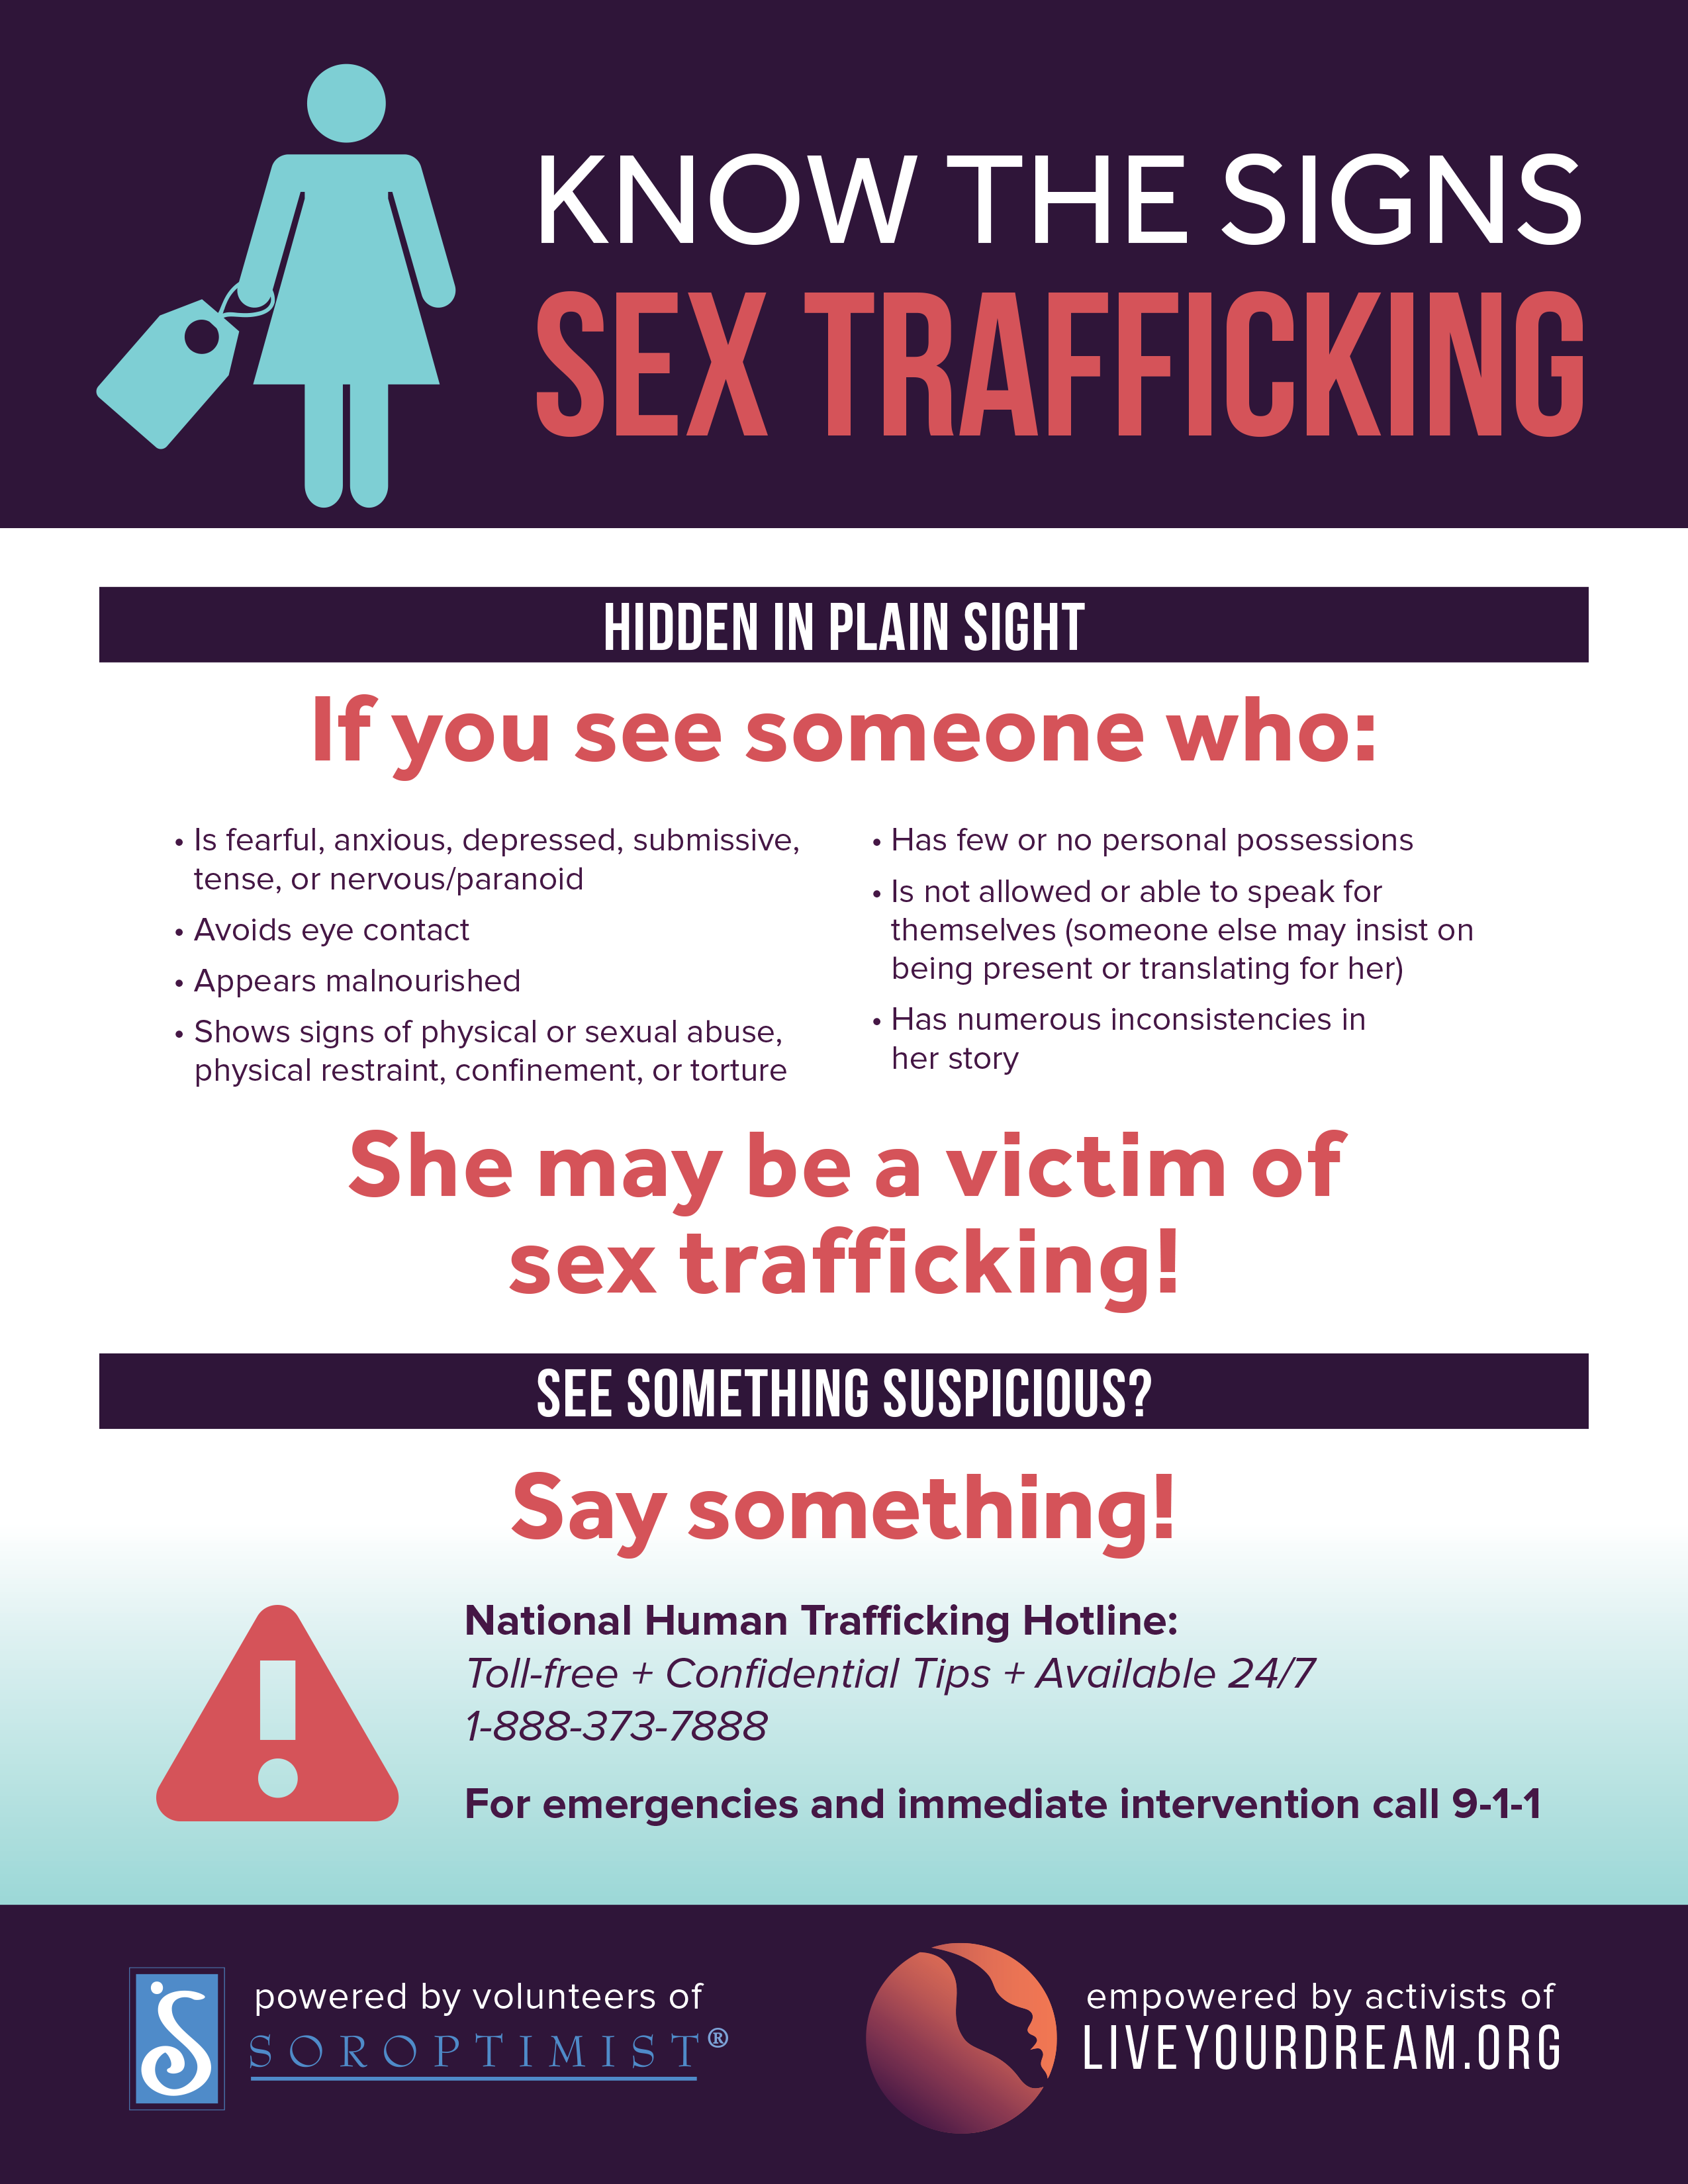 10 Myths About Sex Trafficking Your Dream Blog